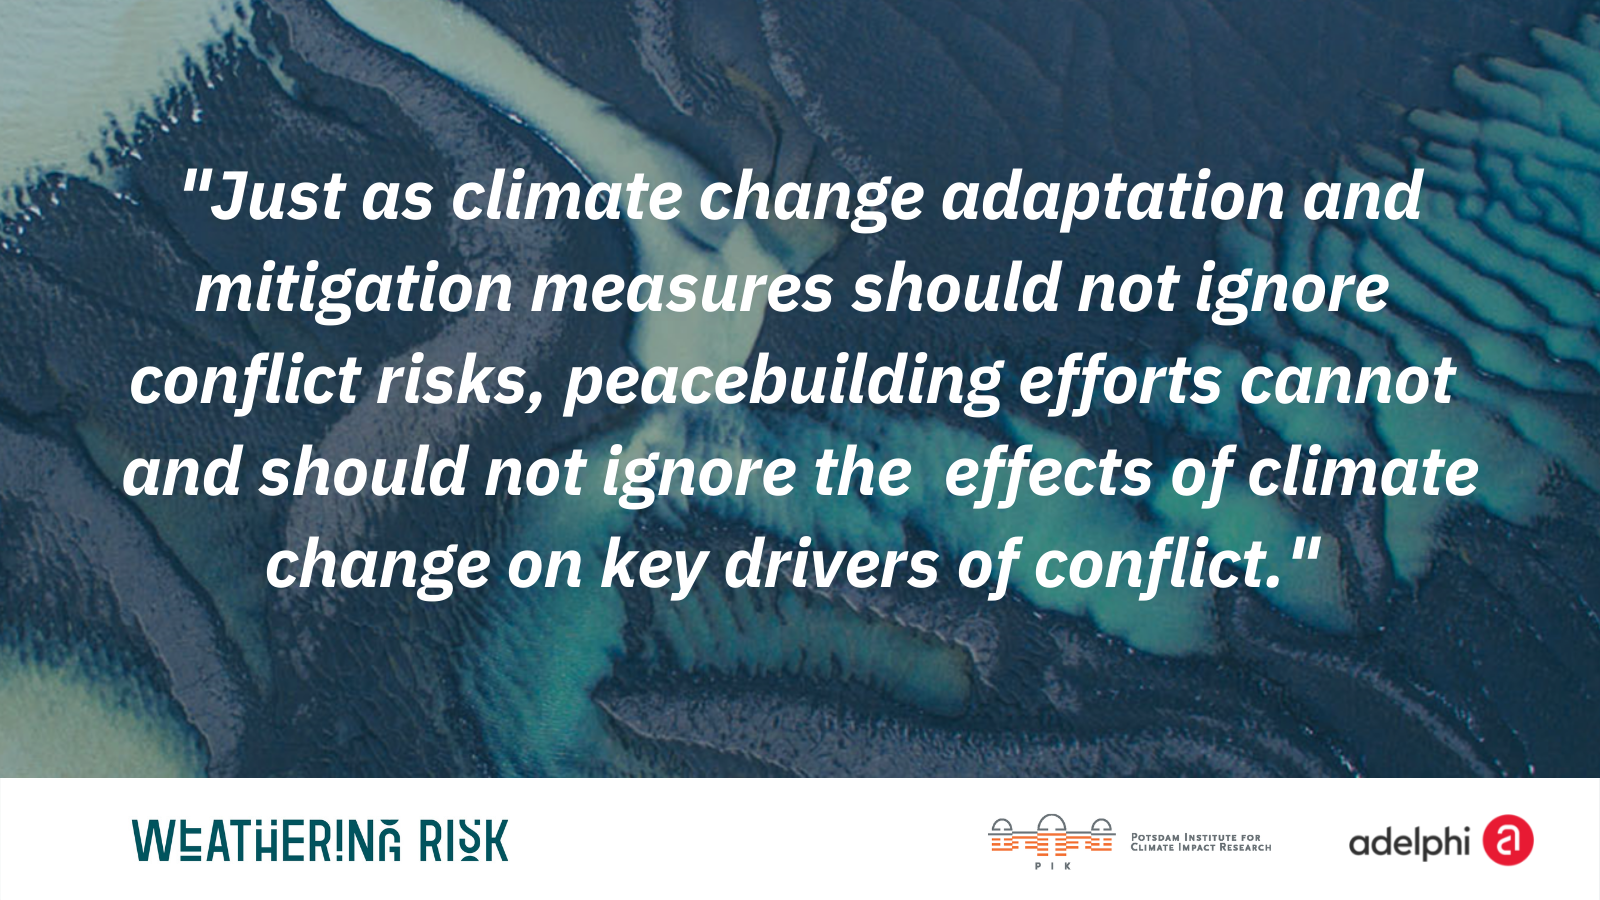 Experts’ statement calls to acknowledge links between climate change and conflict